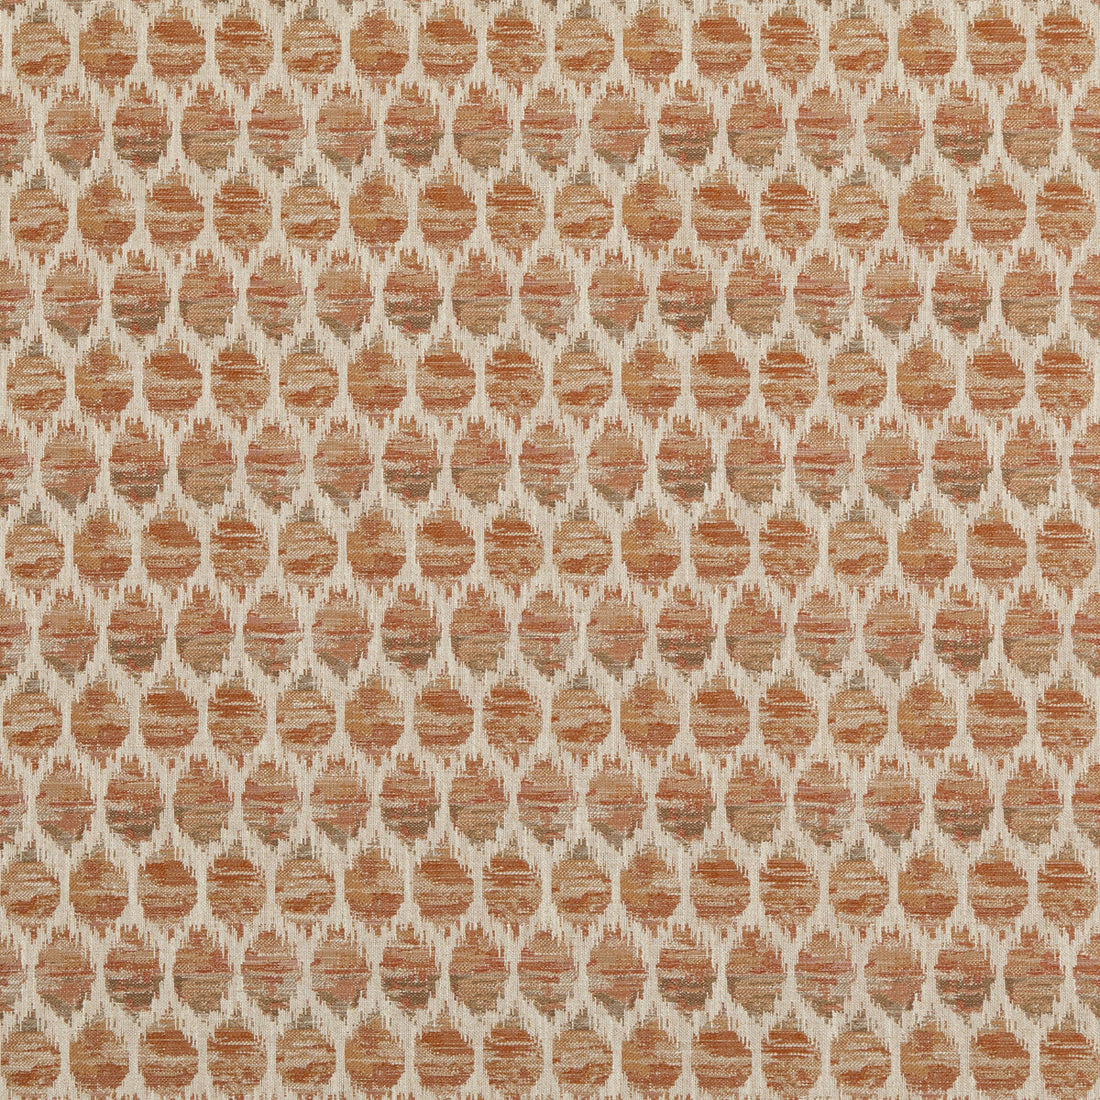 Honeycomb fabric in spice color - pattern PF50491.330.0 - by Baker Lifestyle in the Block Weaves collection